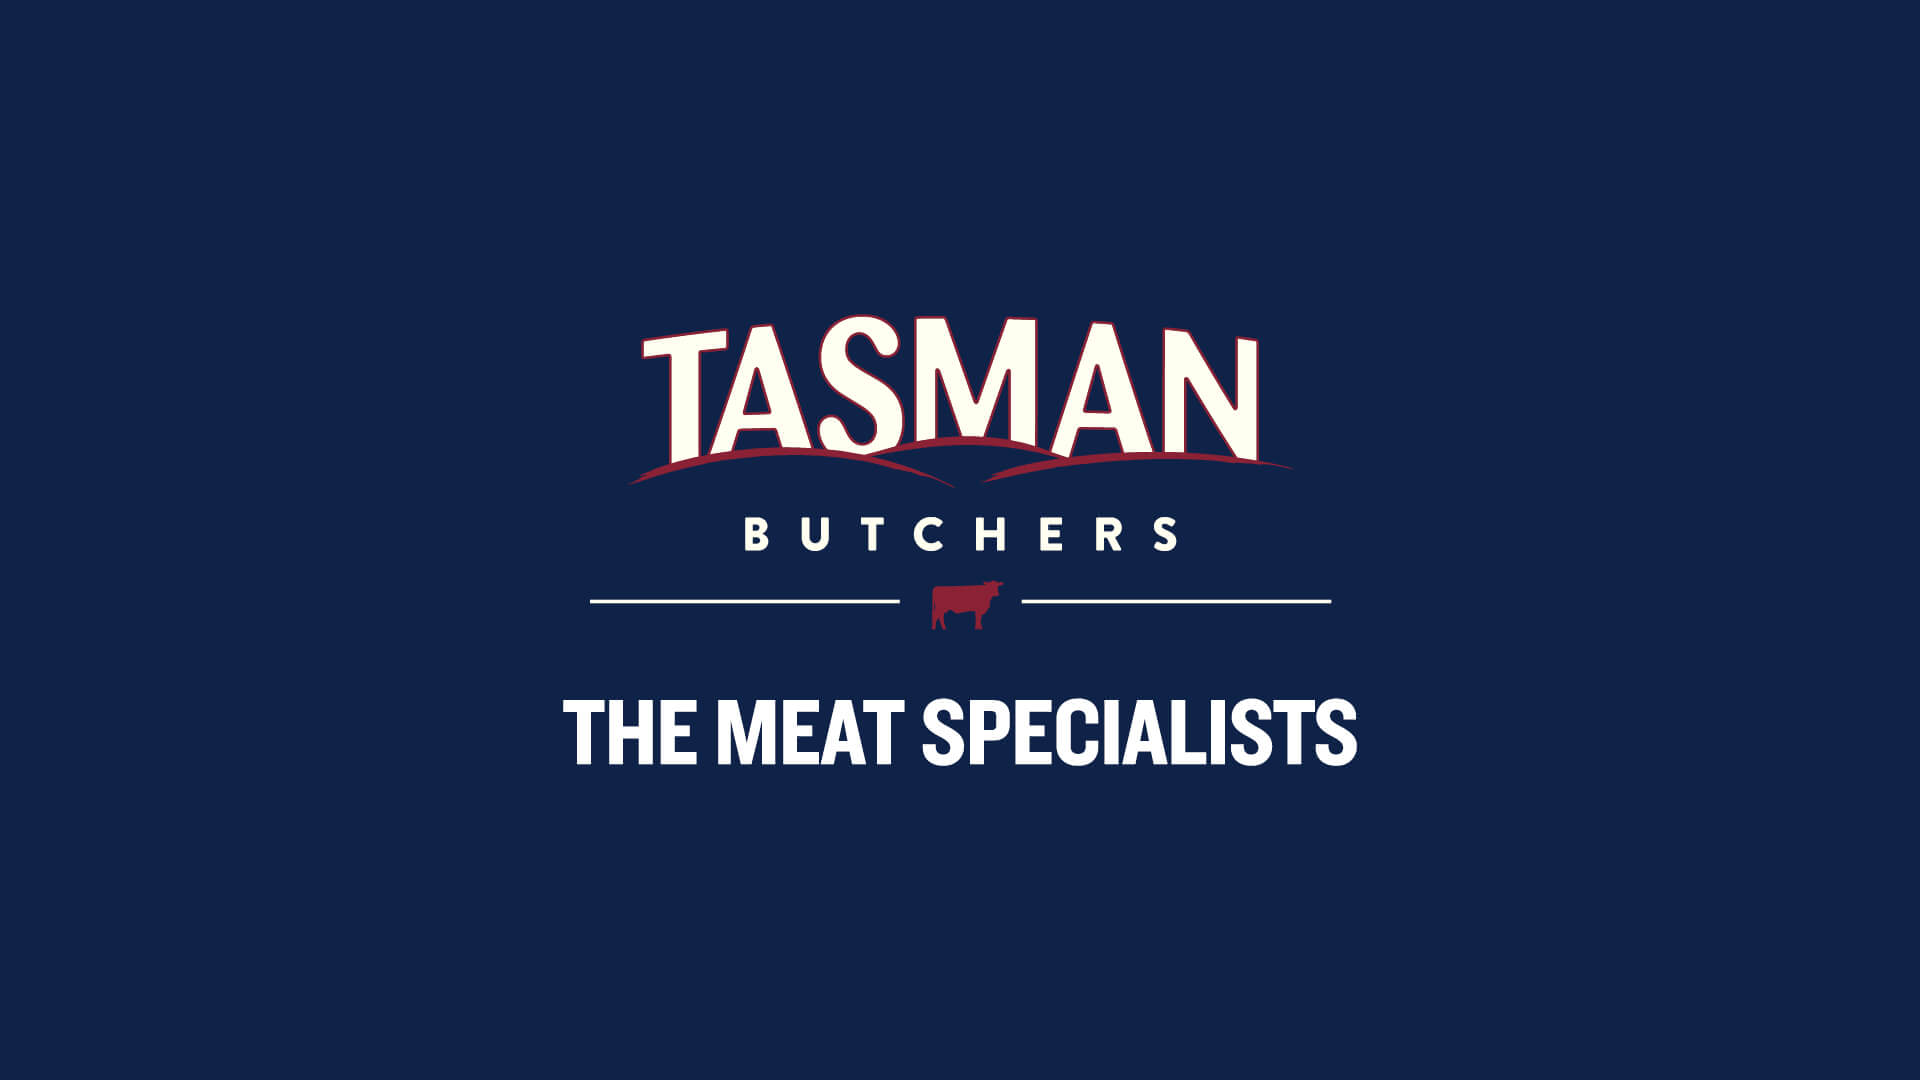 The Meat Specialists